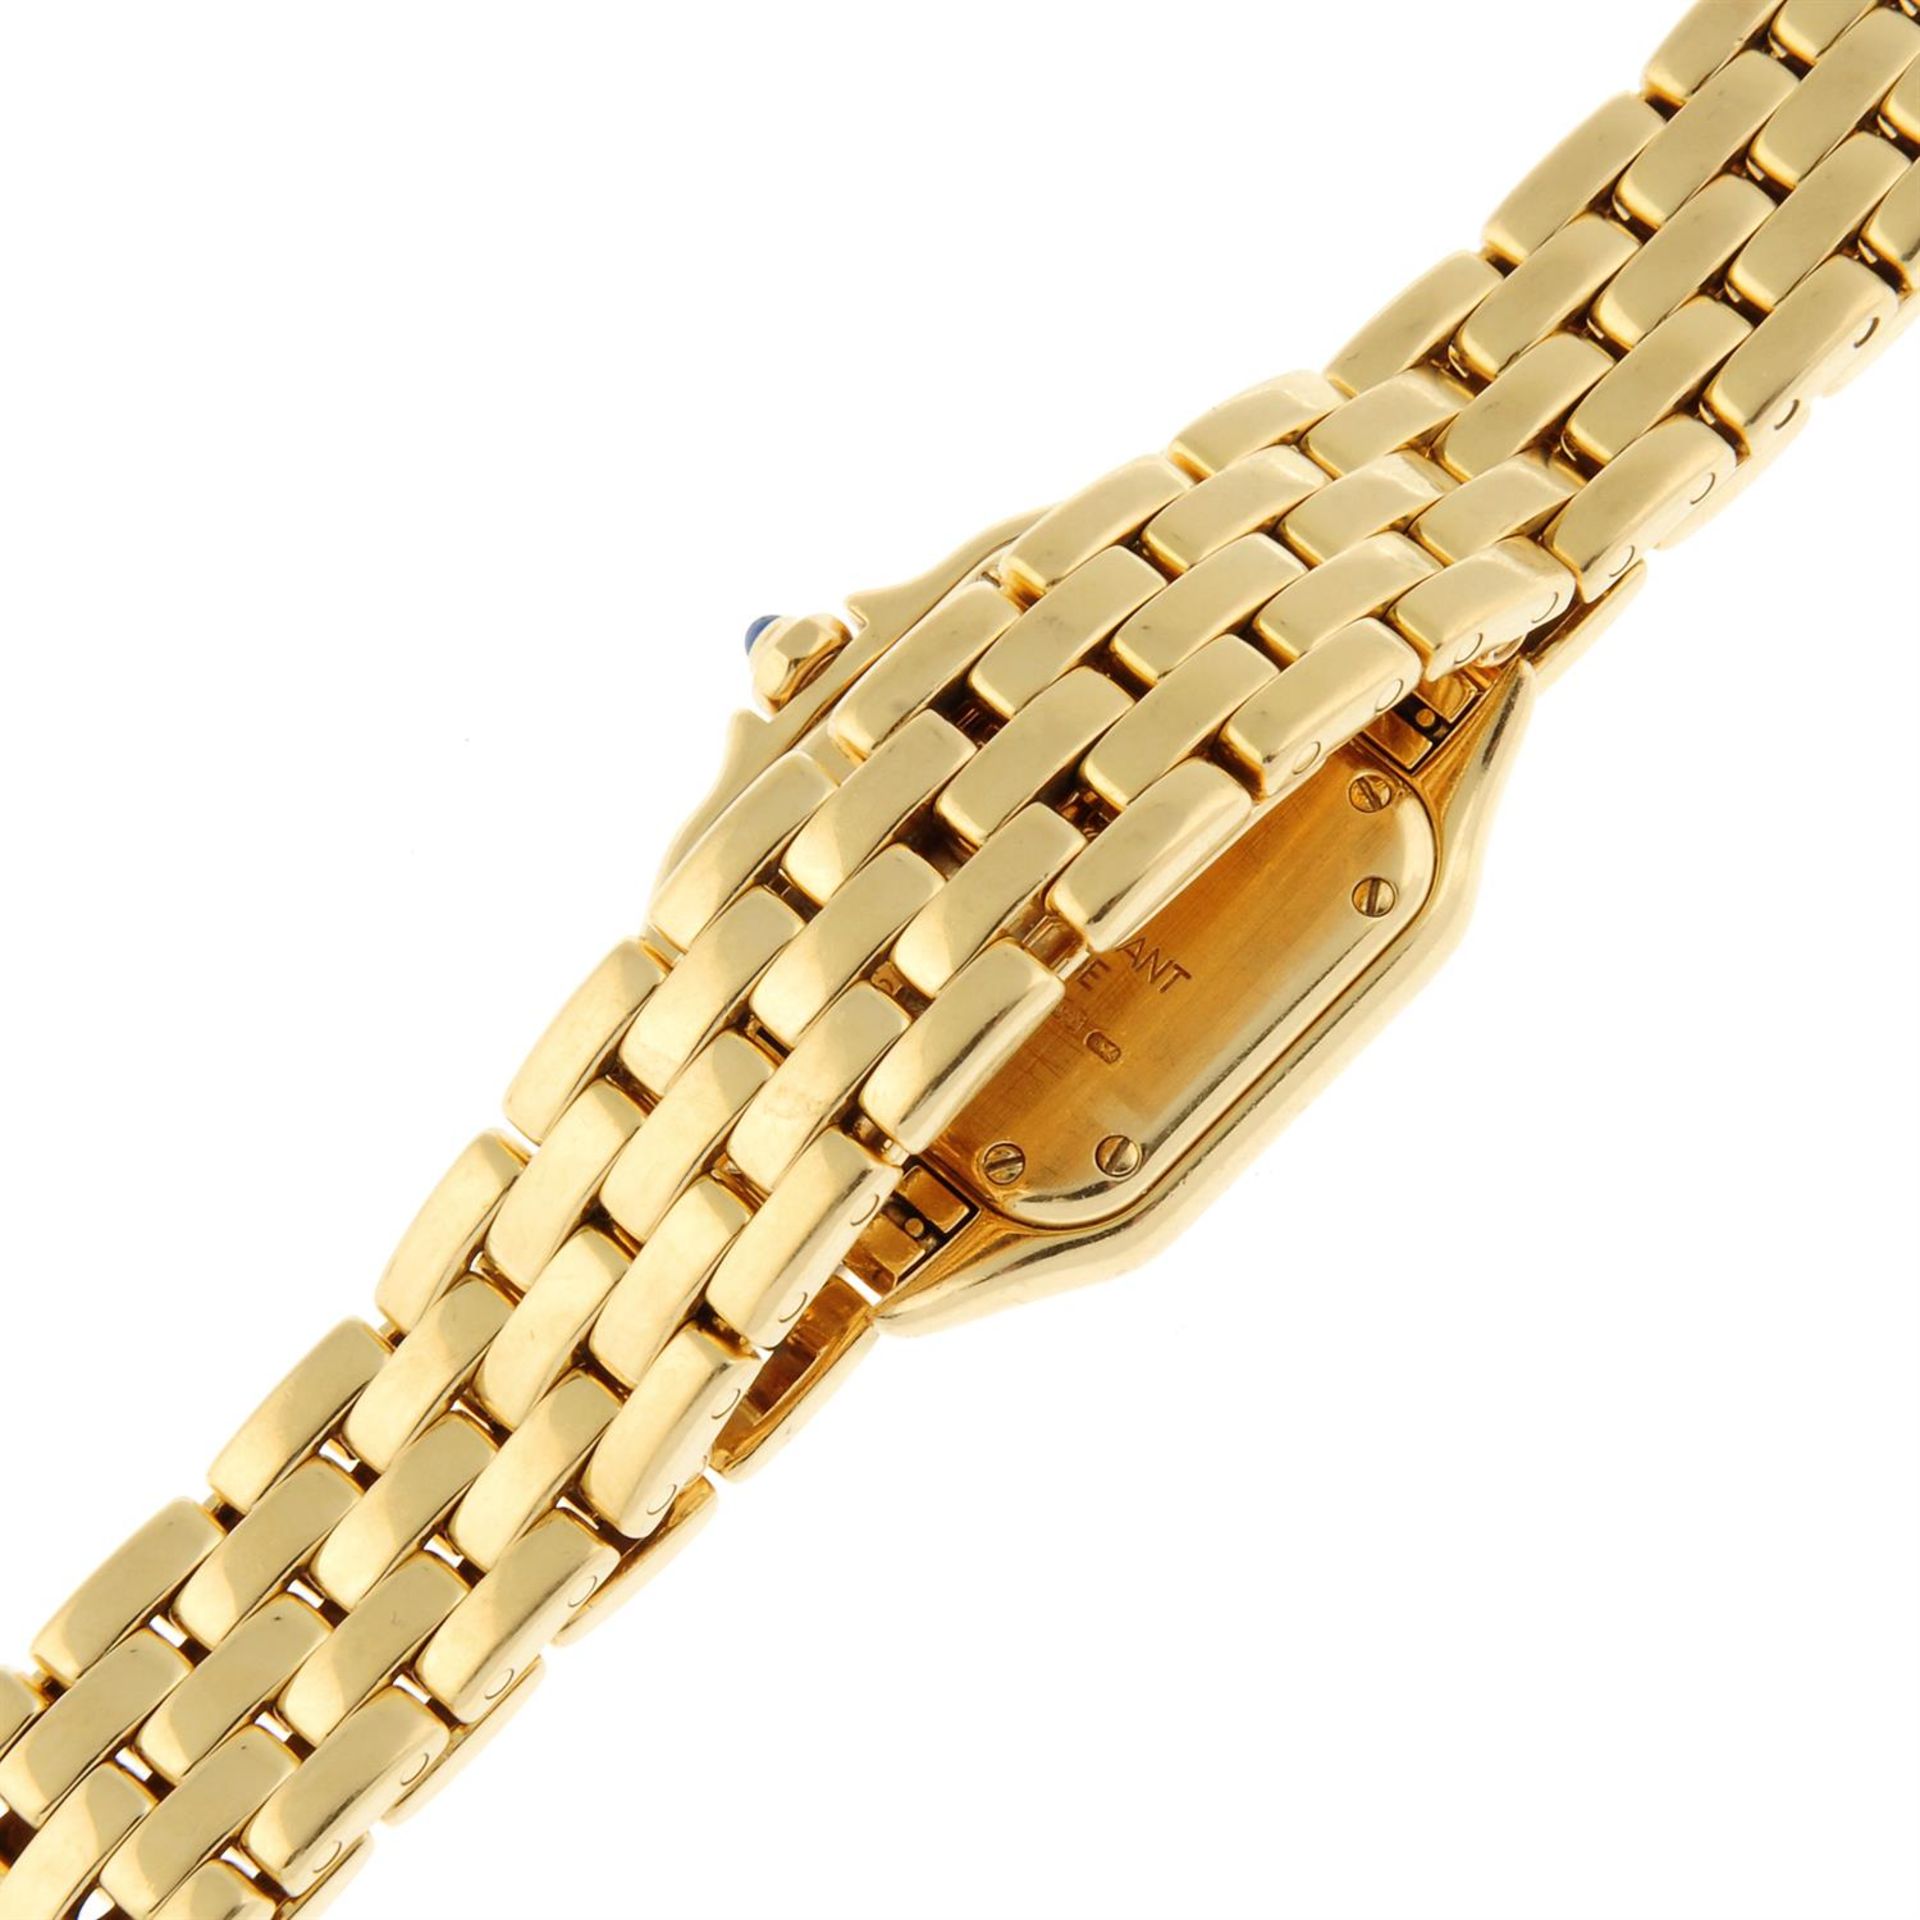 Cartier - a Panthère watch, 21mm. - Image 2 of 7